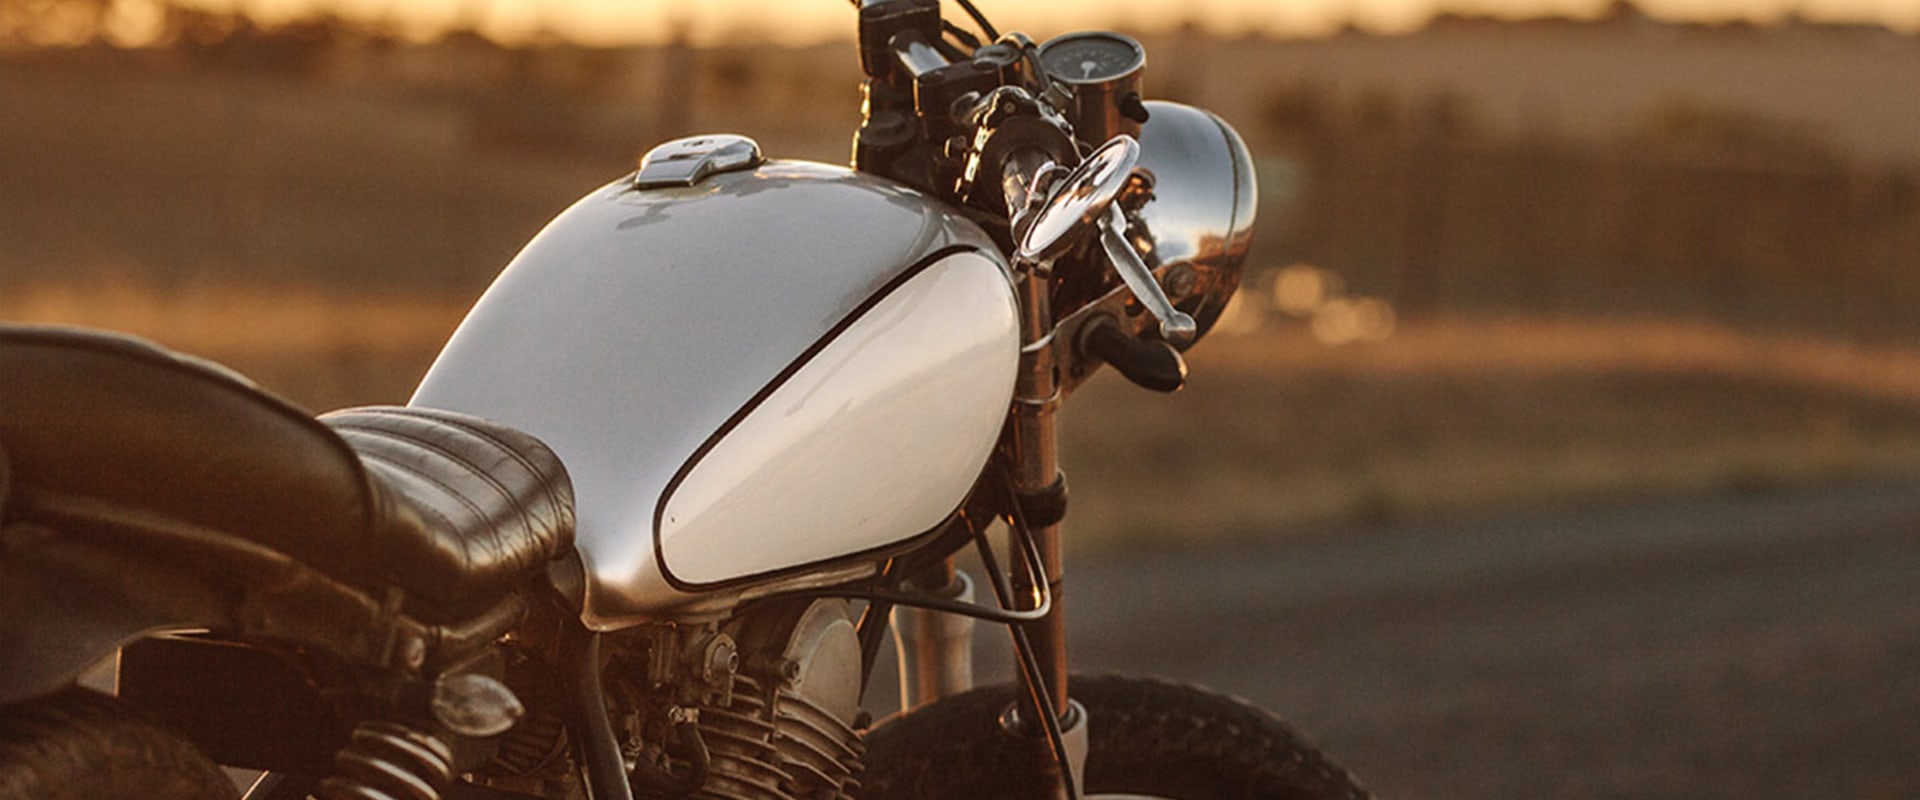 Theft Insurance for Vintage Motorcycles